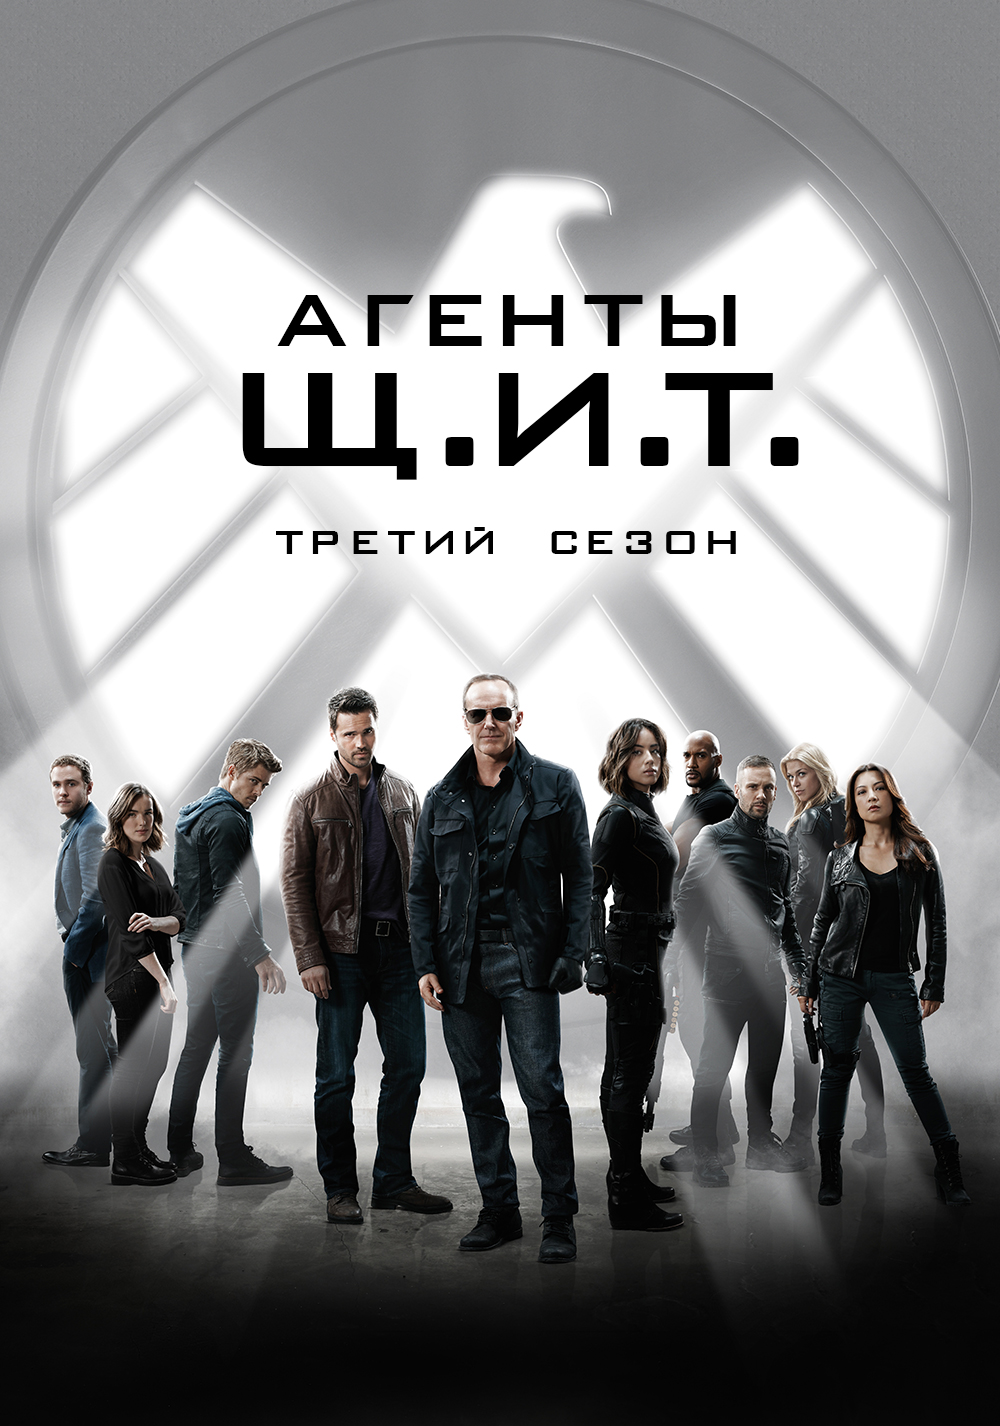 marvel agents of shield season 1 all episodes download